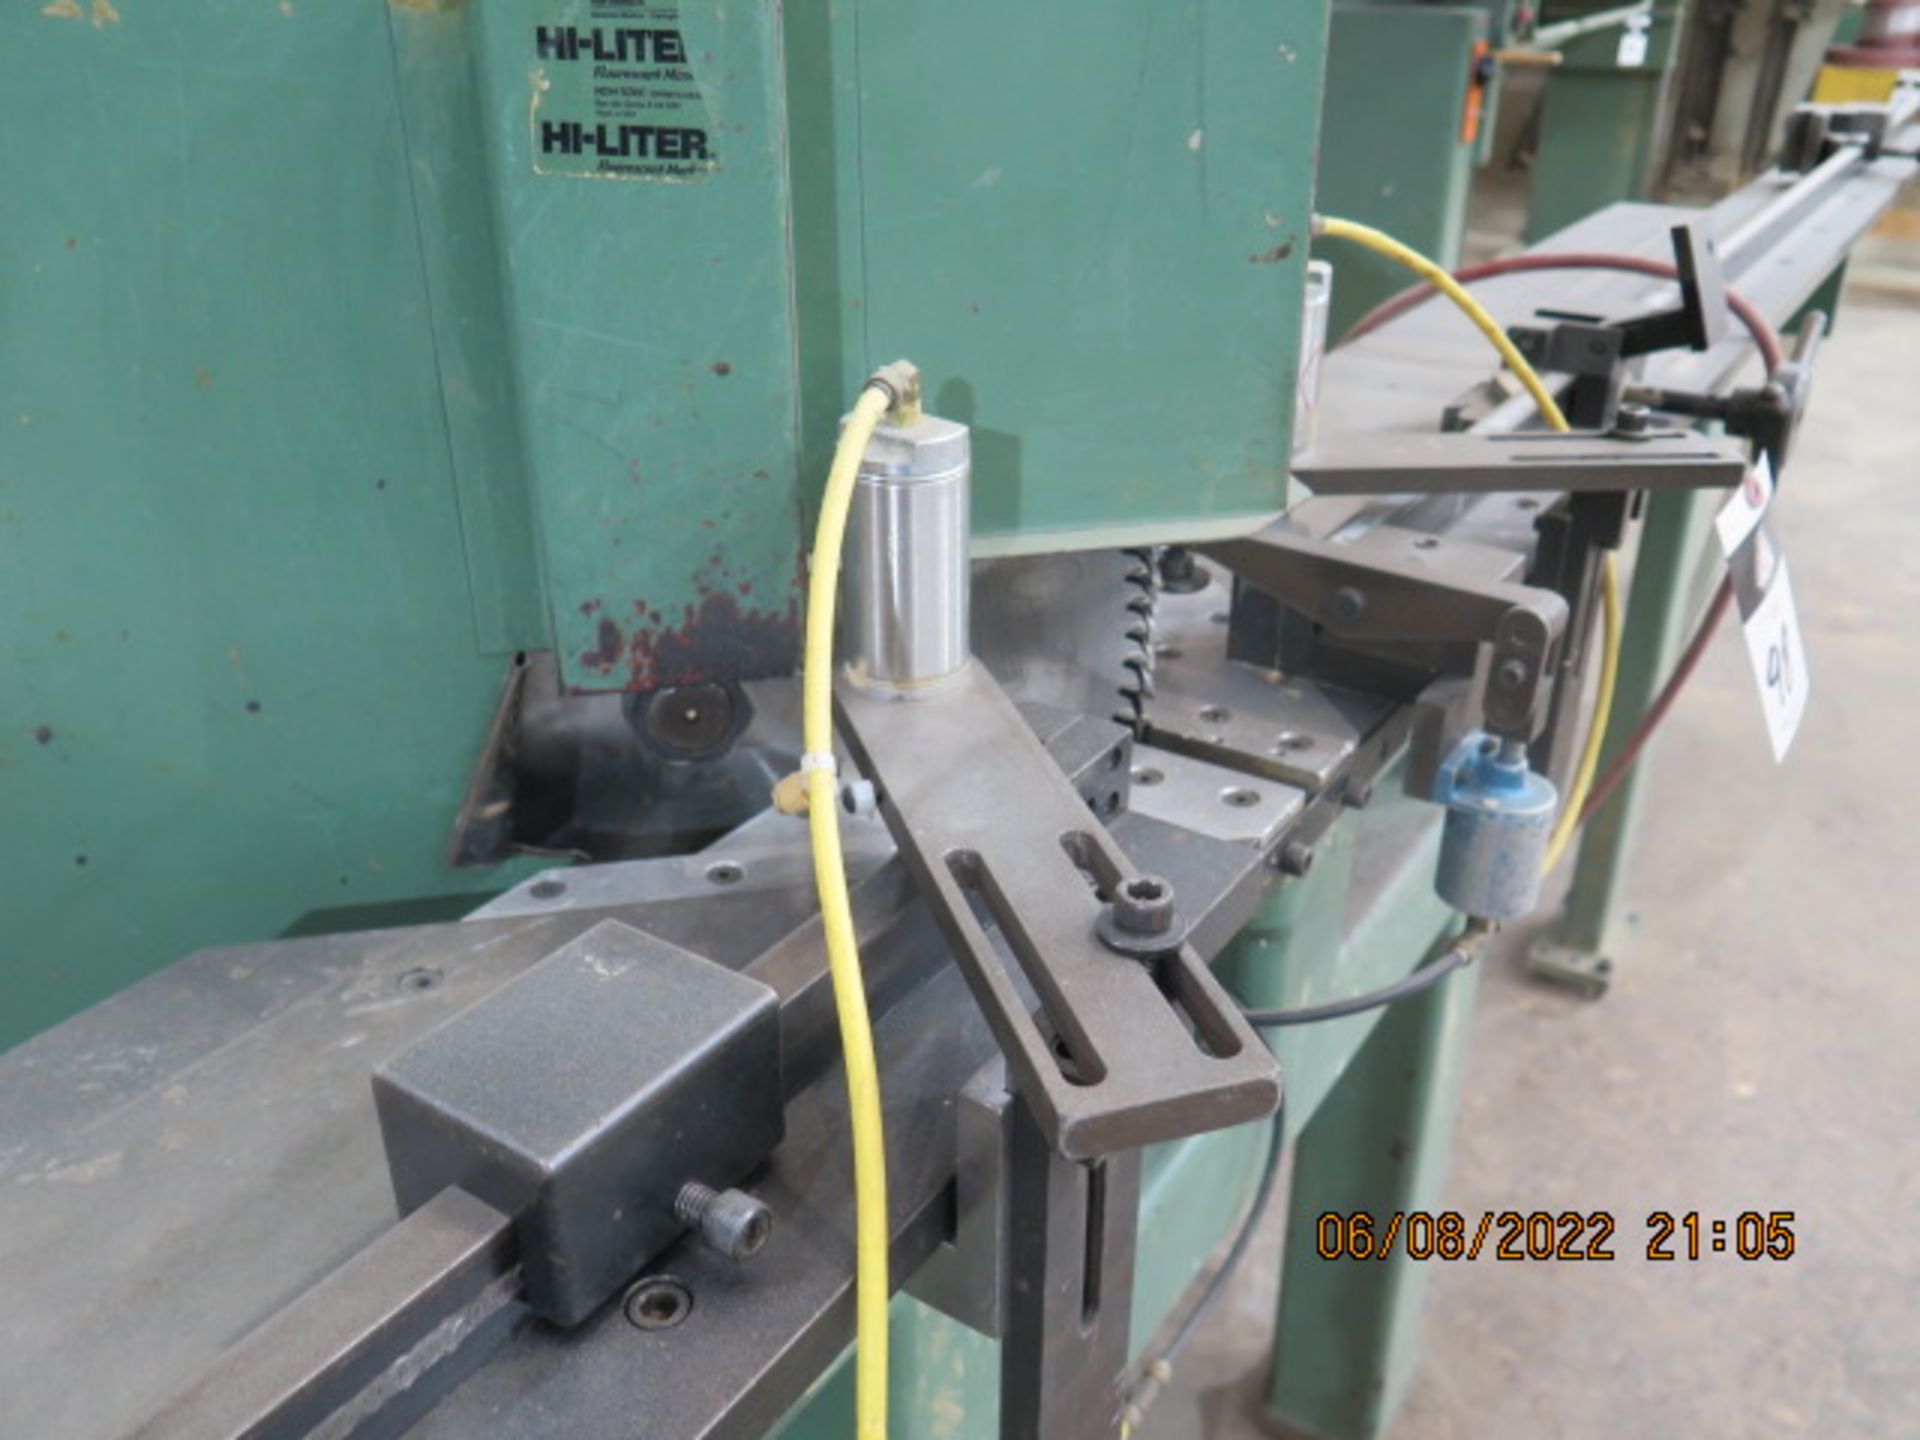 Cimmco DM100 Miter-Cut Saw s/n 8001 w/ Pneumatic Clamping and Feed, Fence System, SOLD AS IS - Image 4 of 10